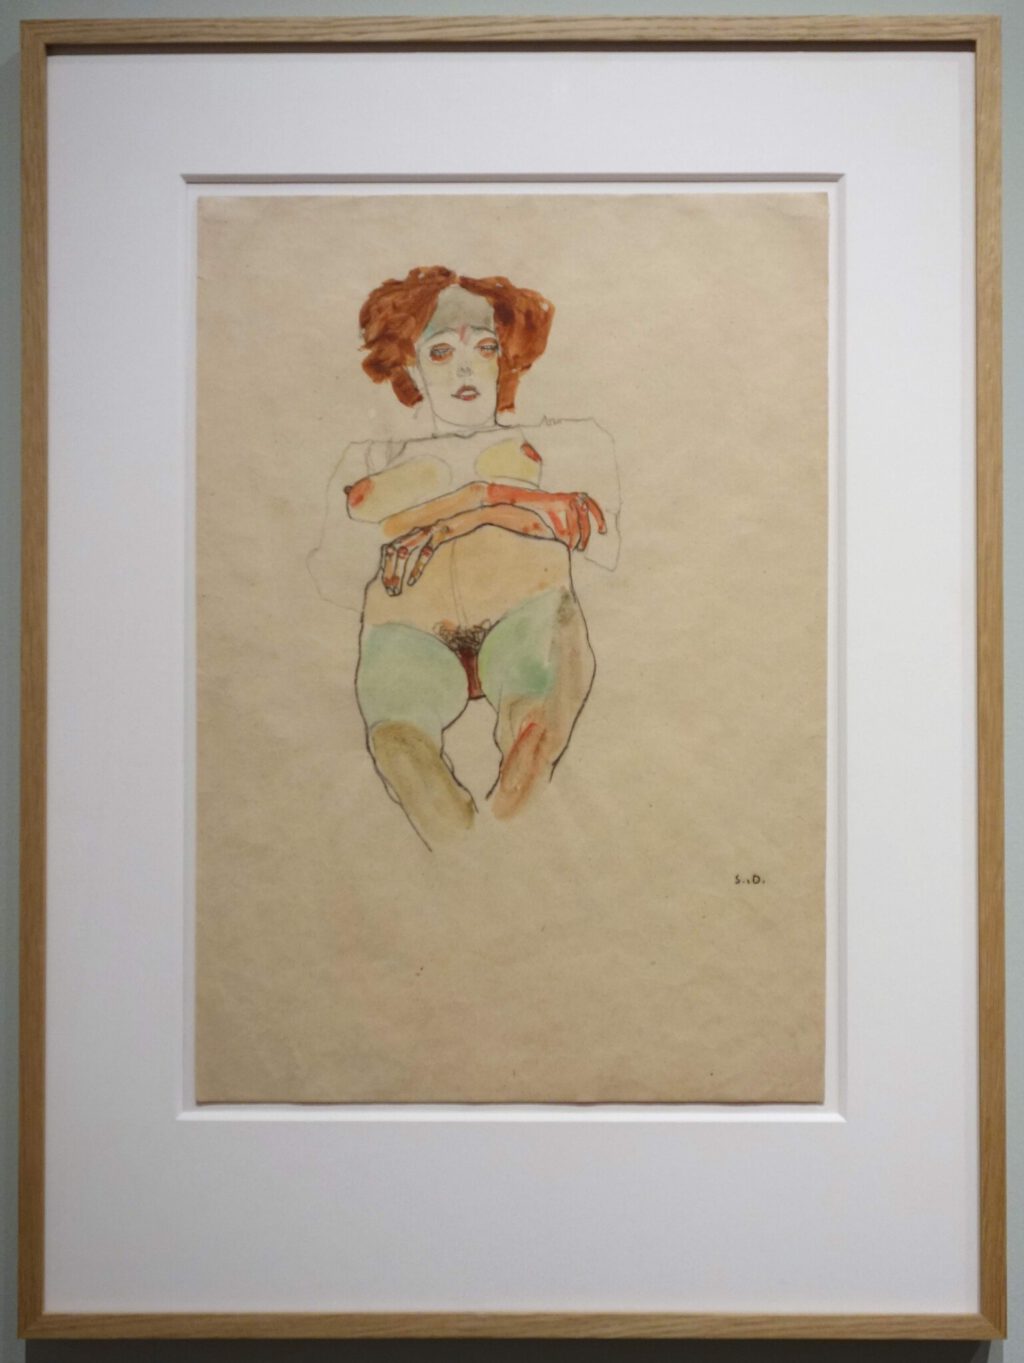 Egon Schiele Seated Pregnant Nude 1910, Watercolour, gouache and black crayon on paper